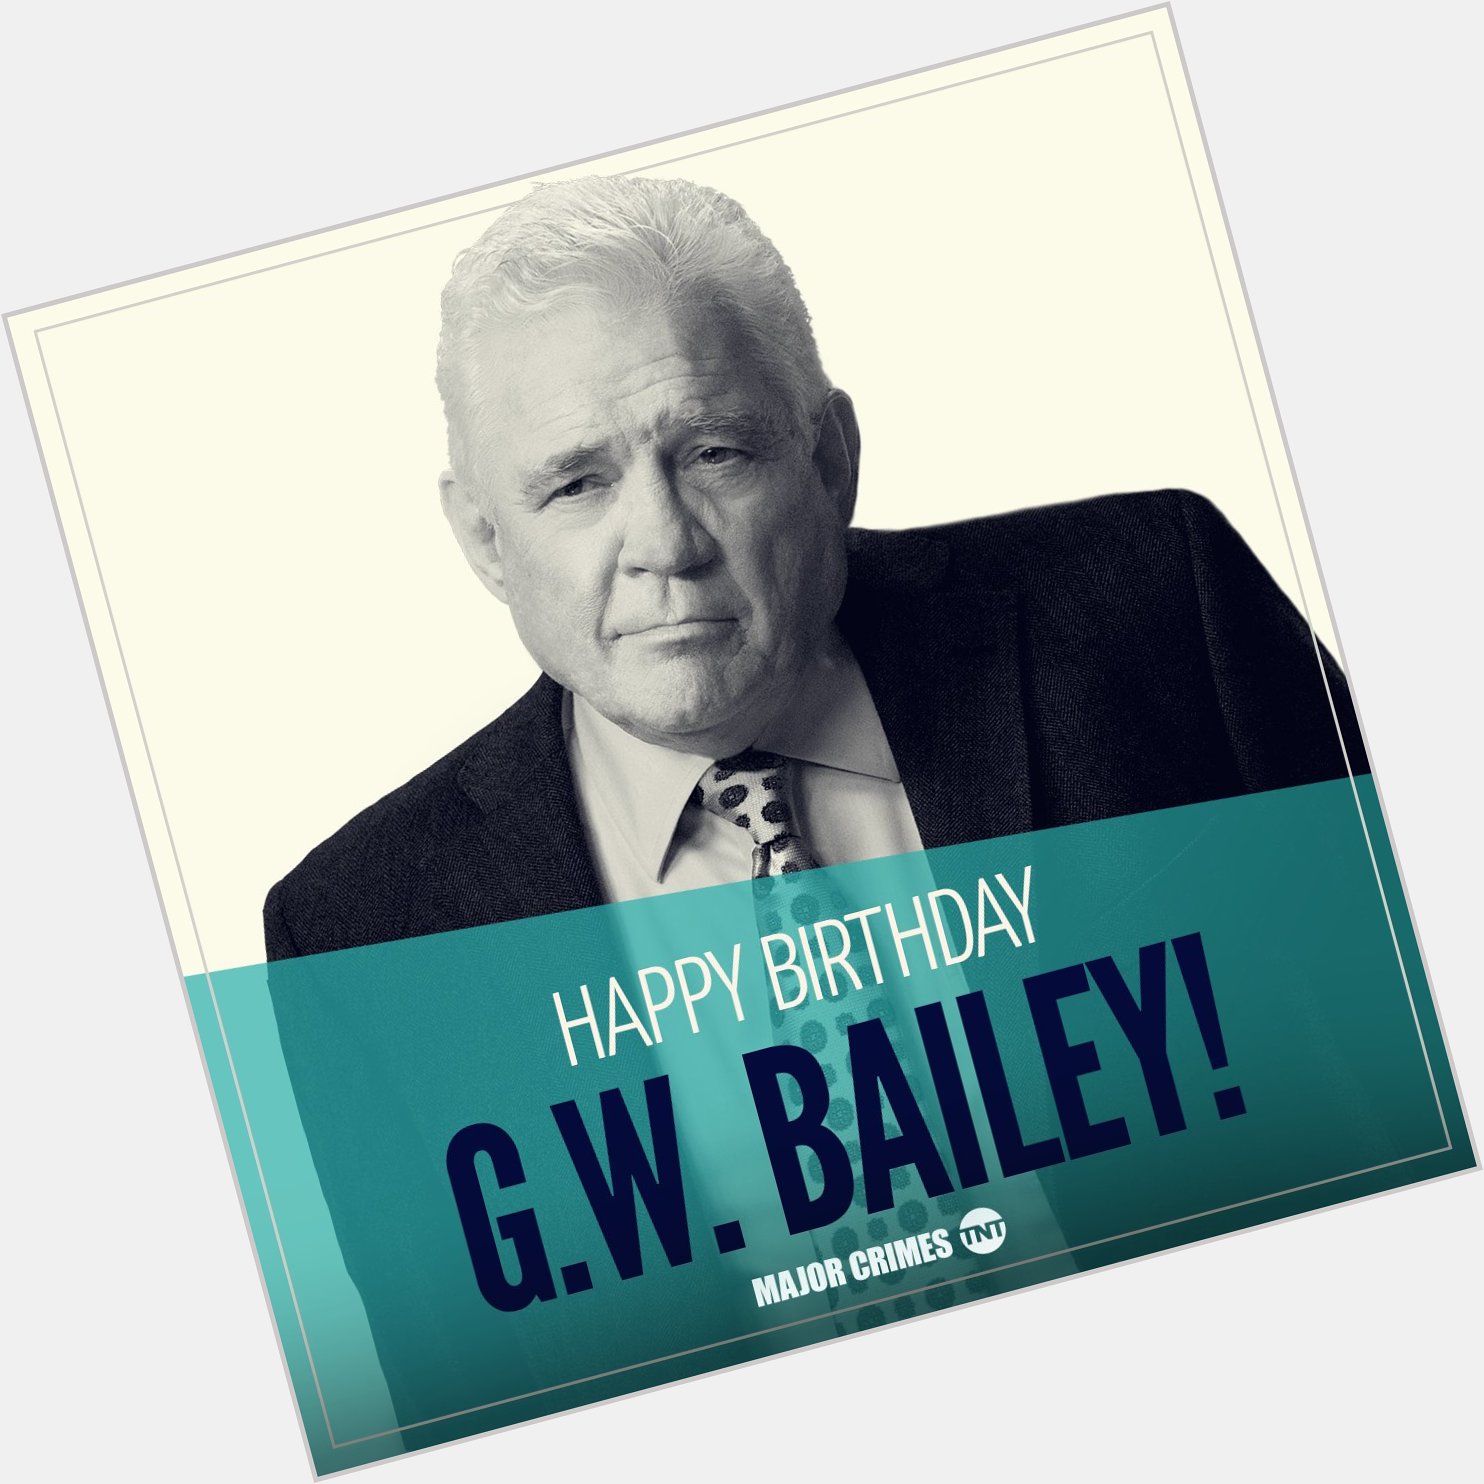 Happy Birthday to our favorite bucket hat wearing detective, G.W. Bailey! 